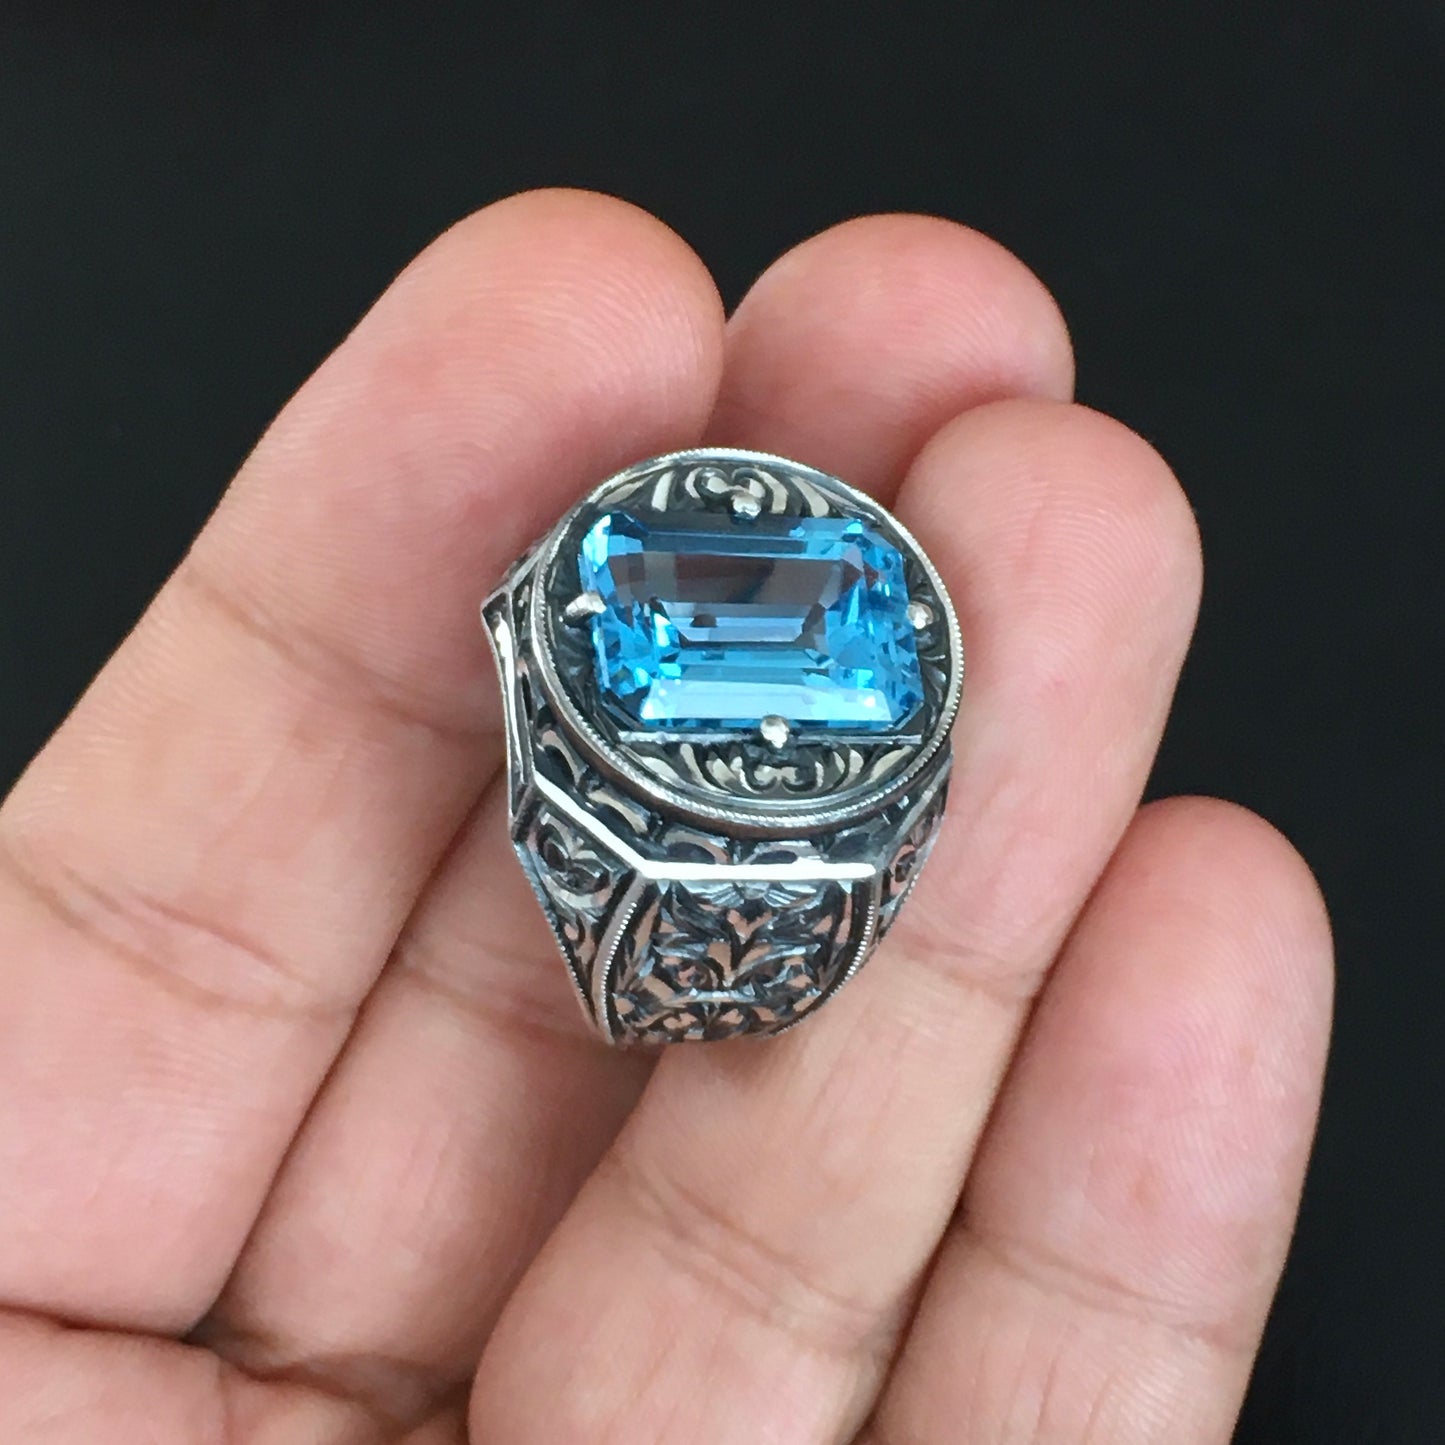 Solid Silver Piece of Art 10ct Aquamarine Handmade Engraved Ring Unique Artisan Jewelry